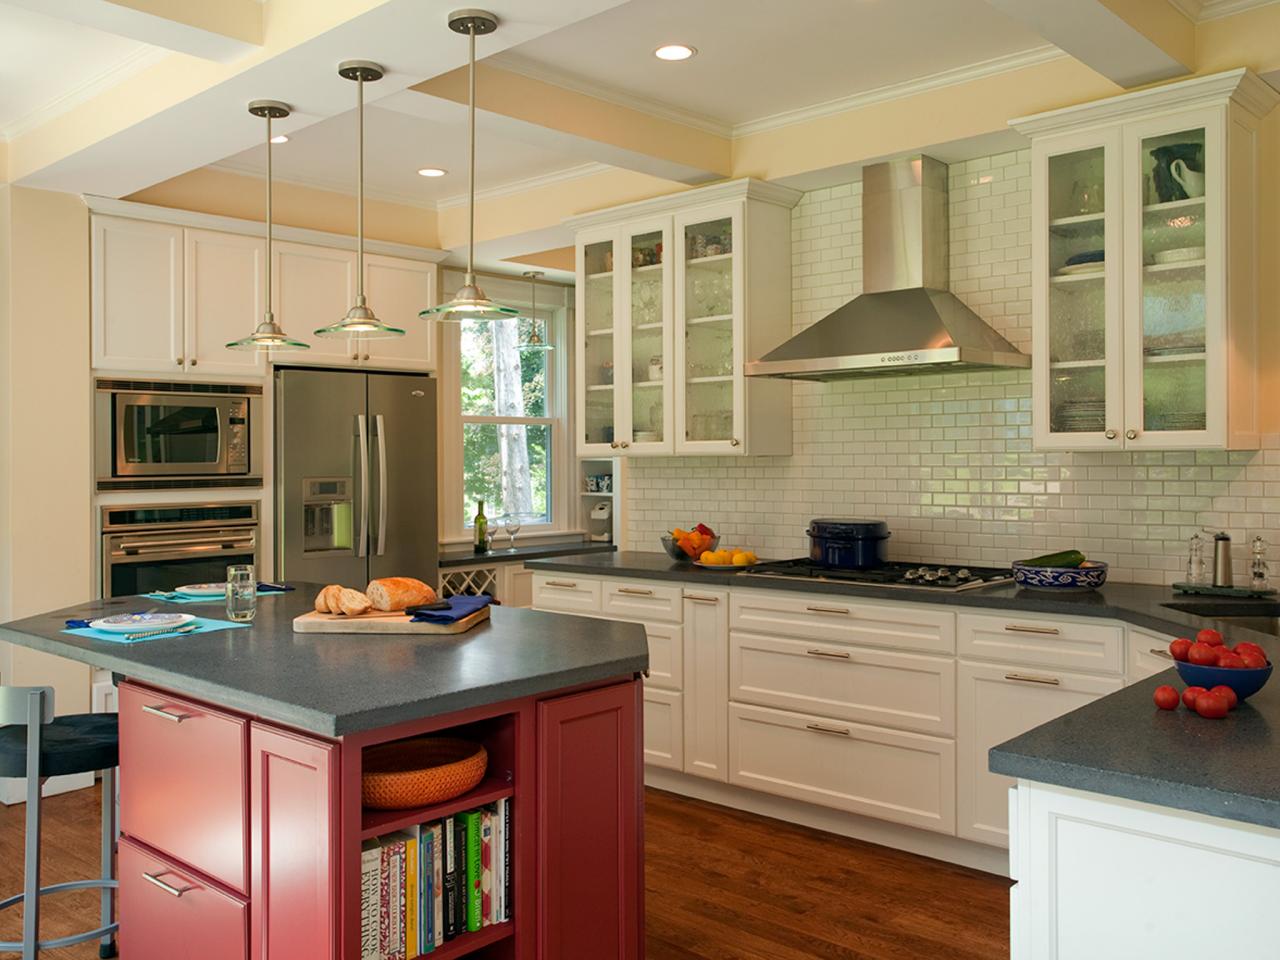 Before And After Kitchen Photos From Hgtv S Fixer Upper Hgtv S